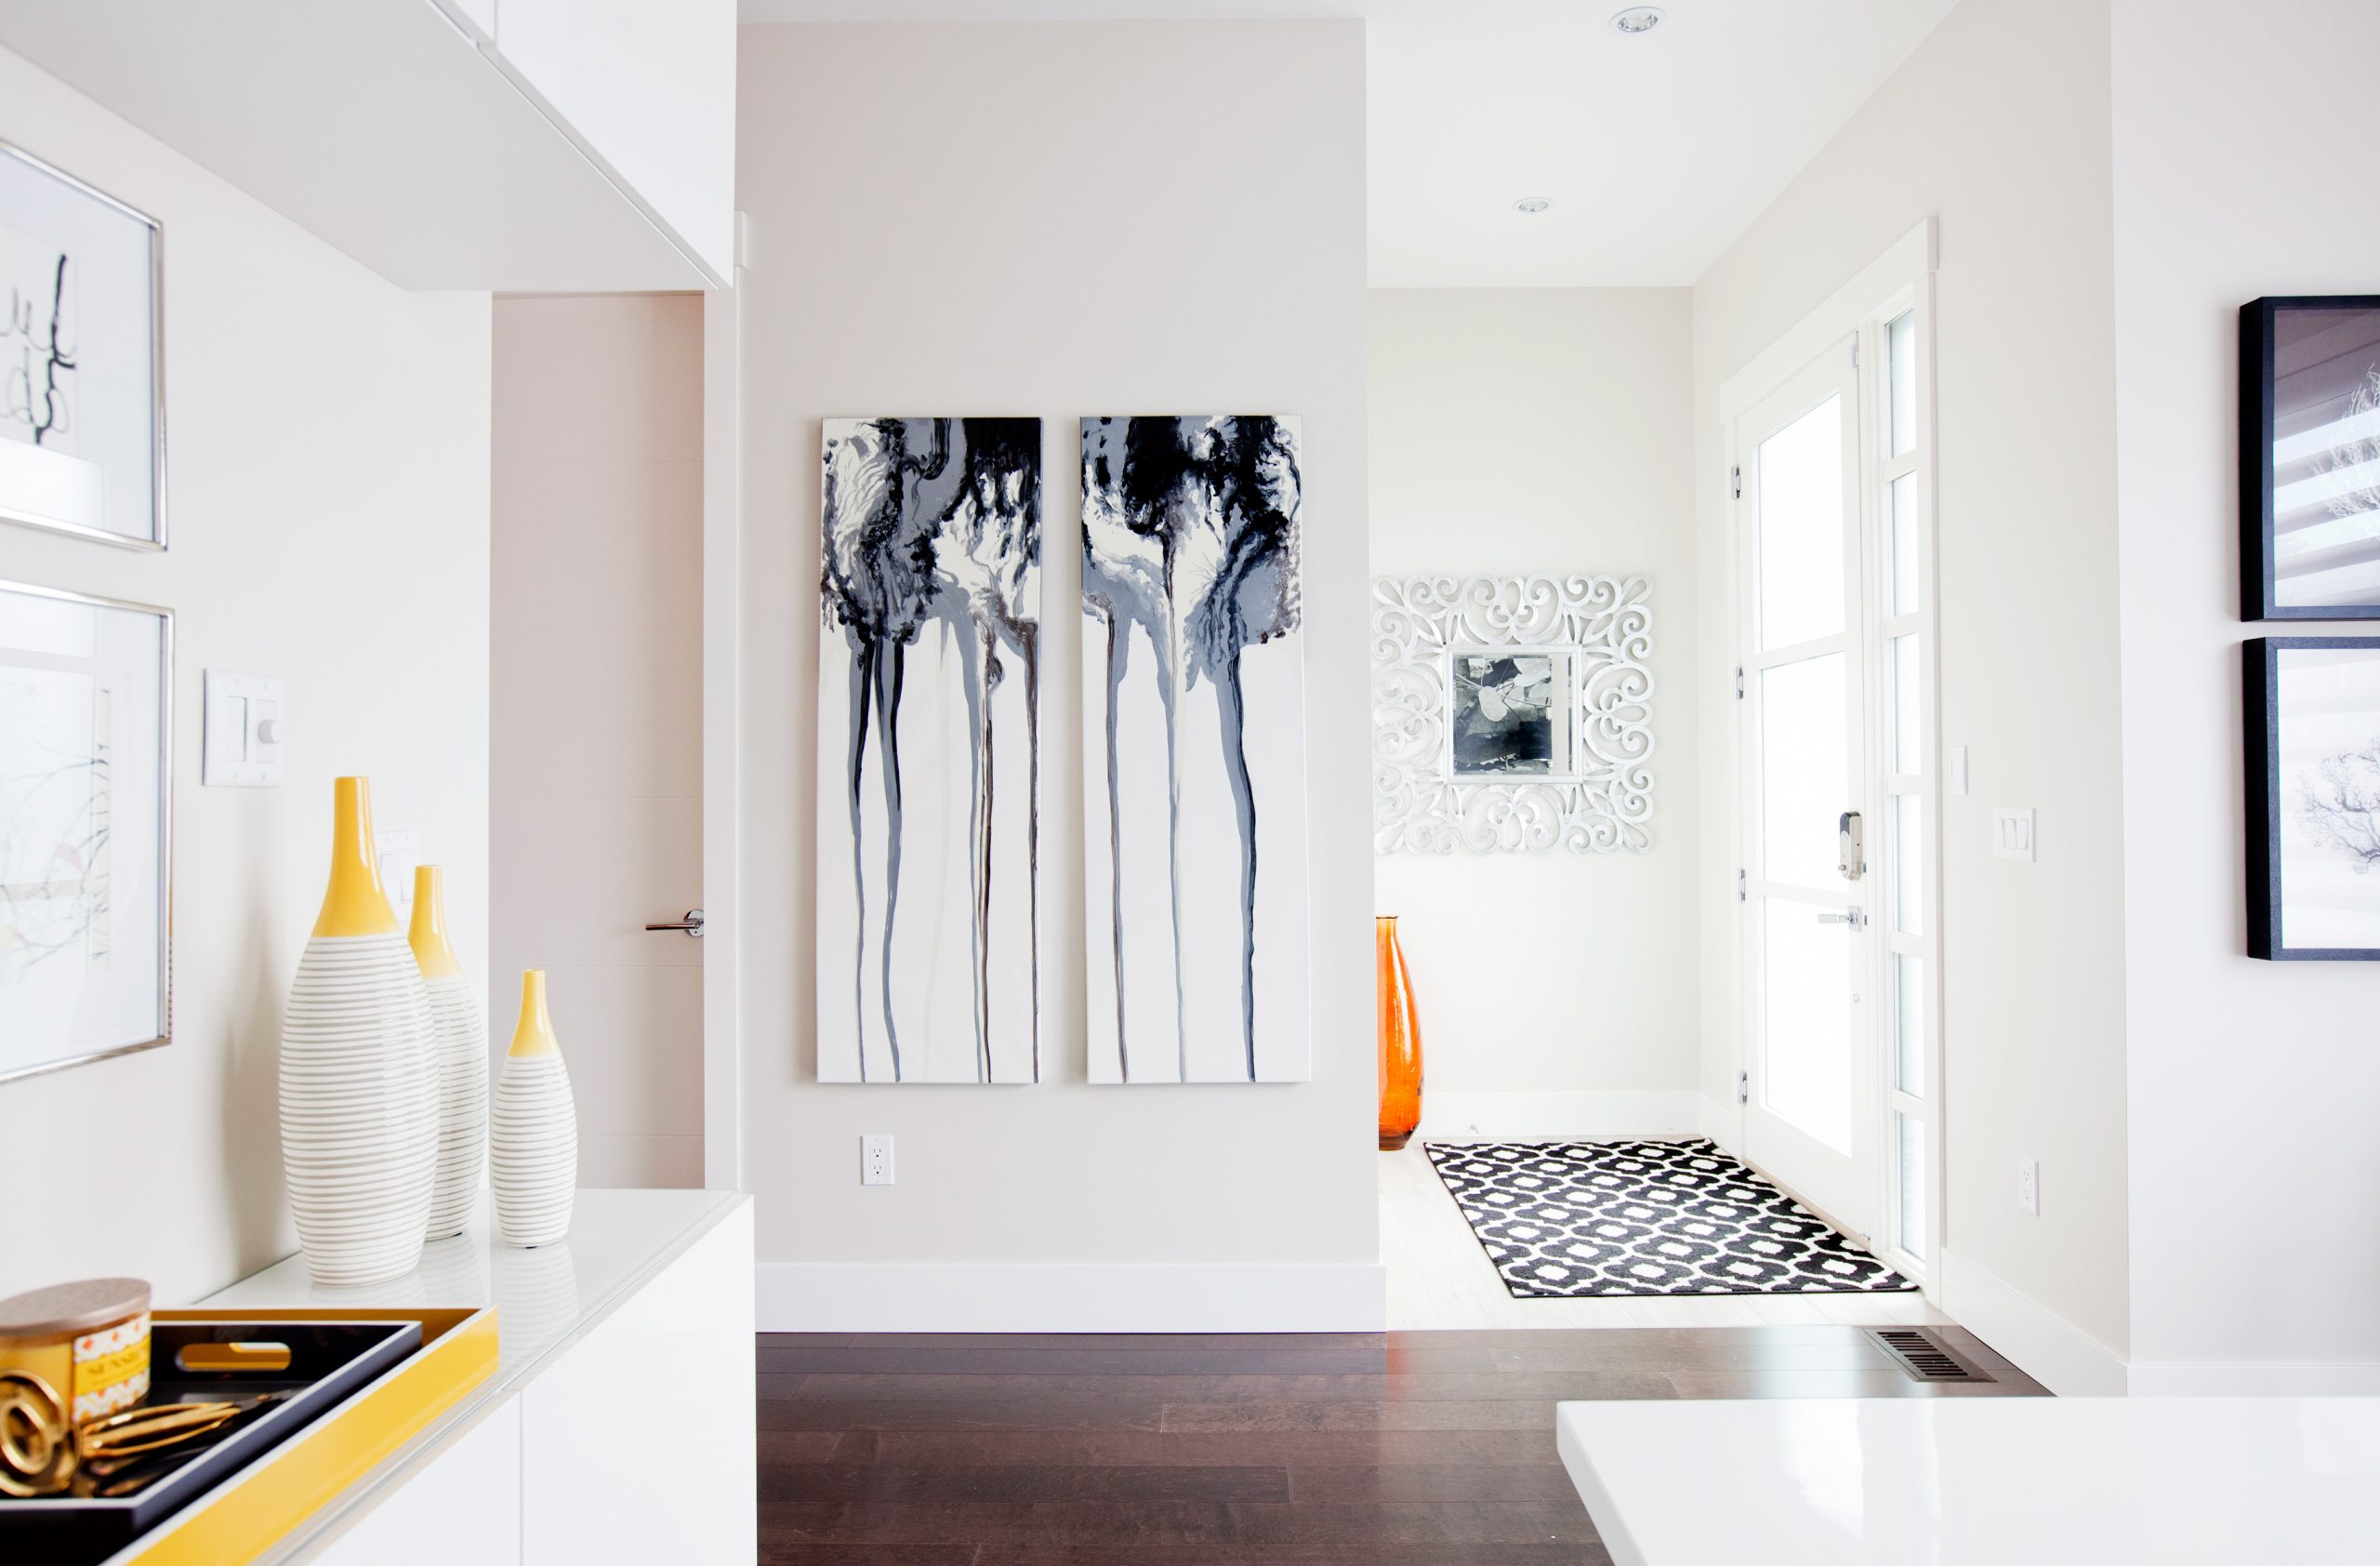 A light-filled Calgary home with bold colour and patterns.